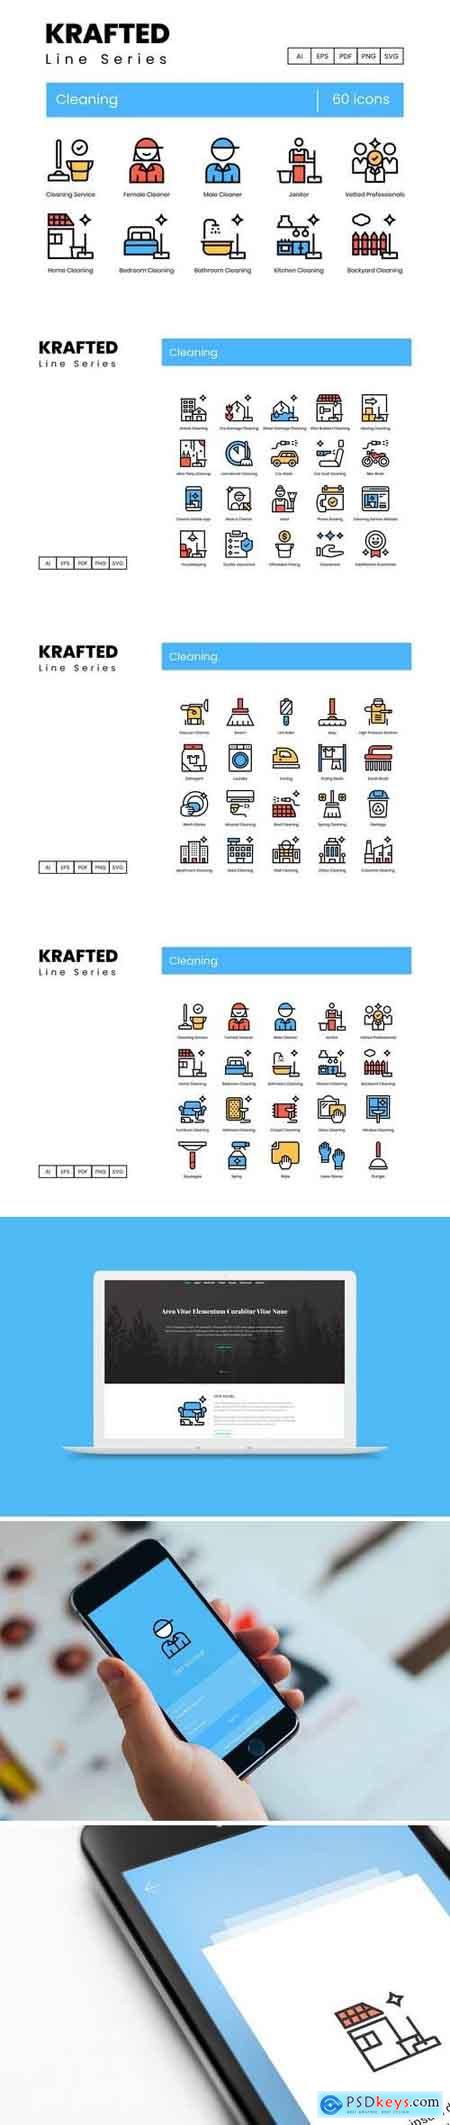 60 Cleaning Icons Krafted Line Series